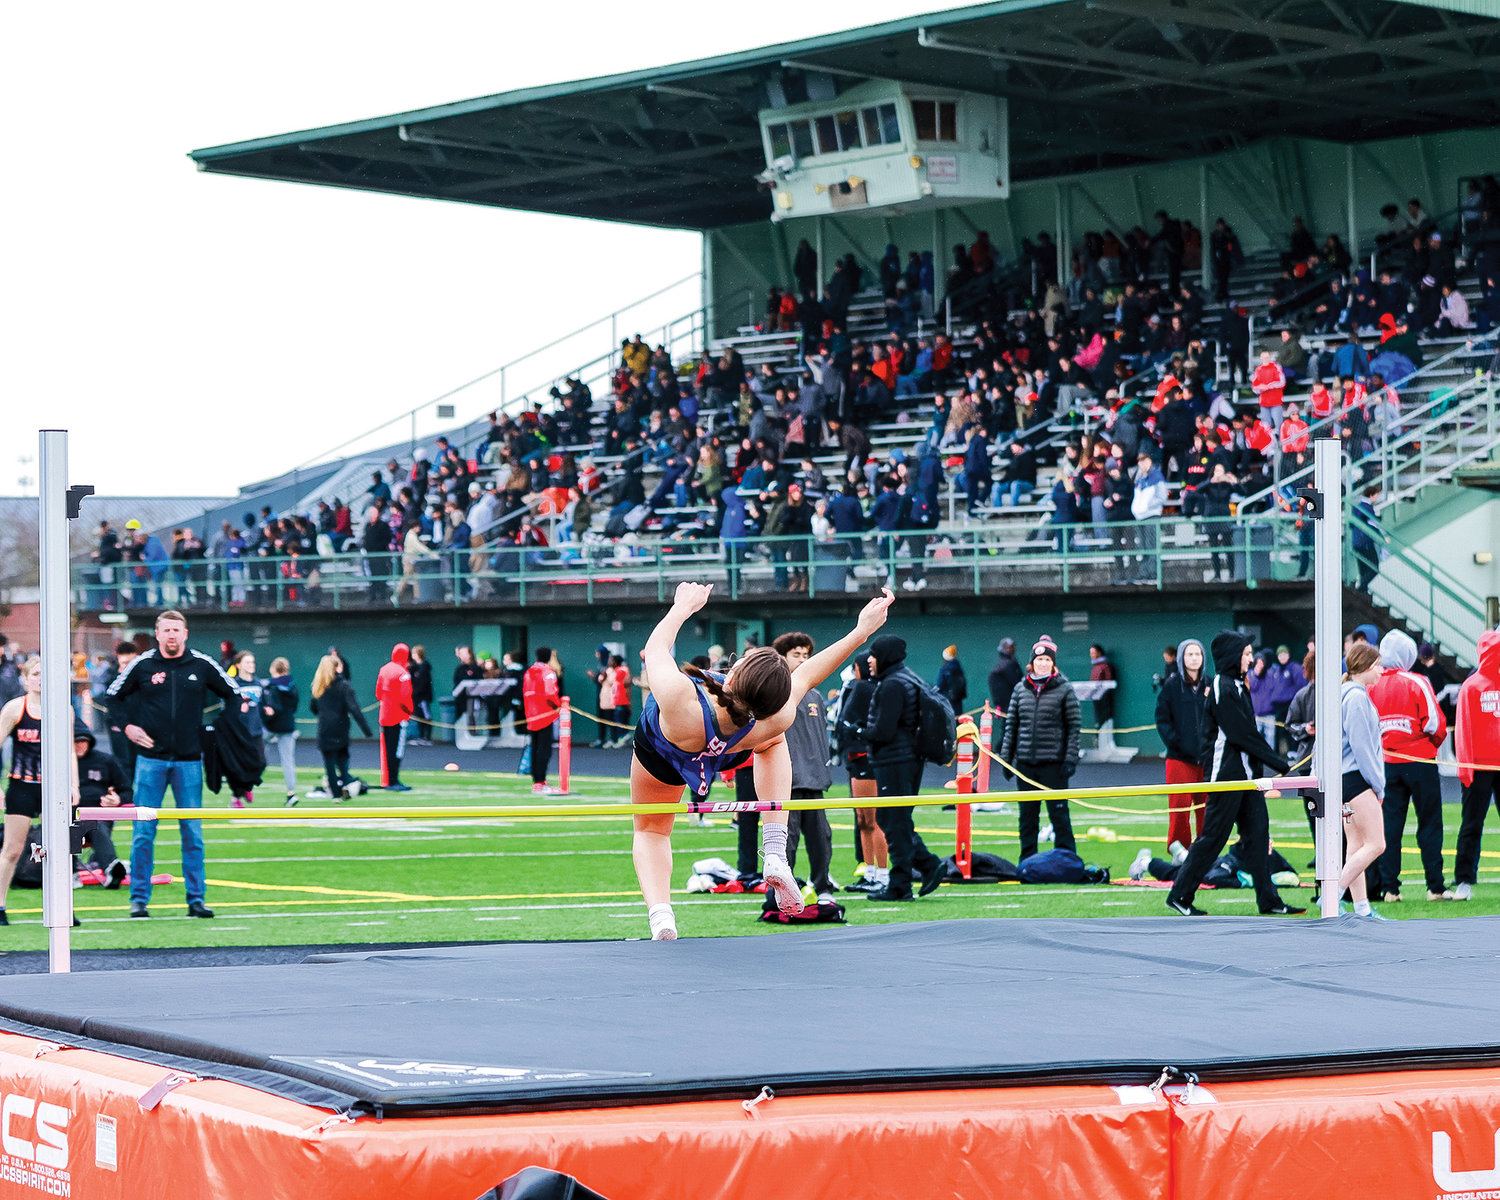 A girls high jumper for Ridgefield clears the bar at the Tiger Invite at Battle Ground High School on Saturday, March 25.